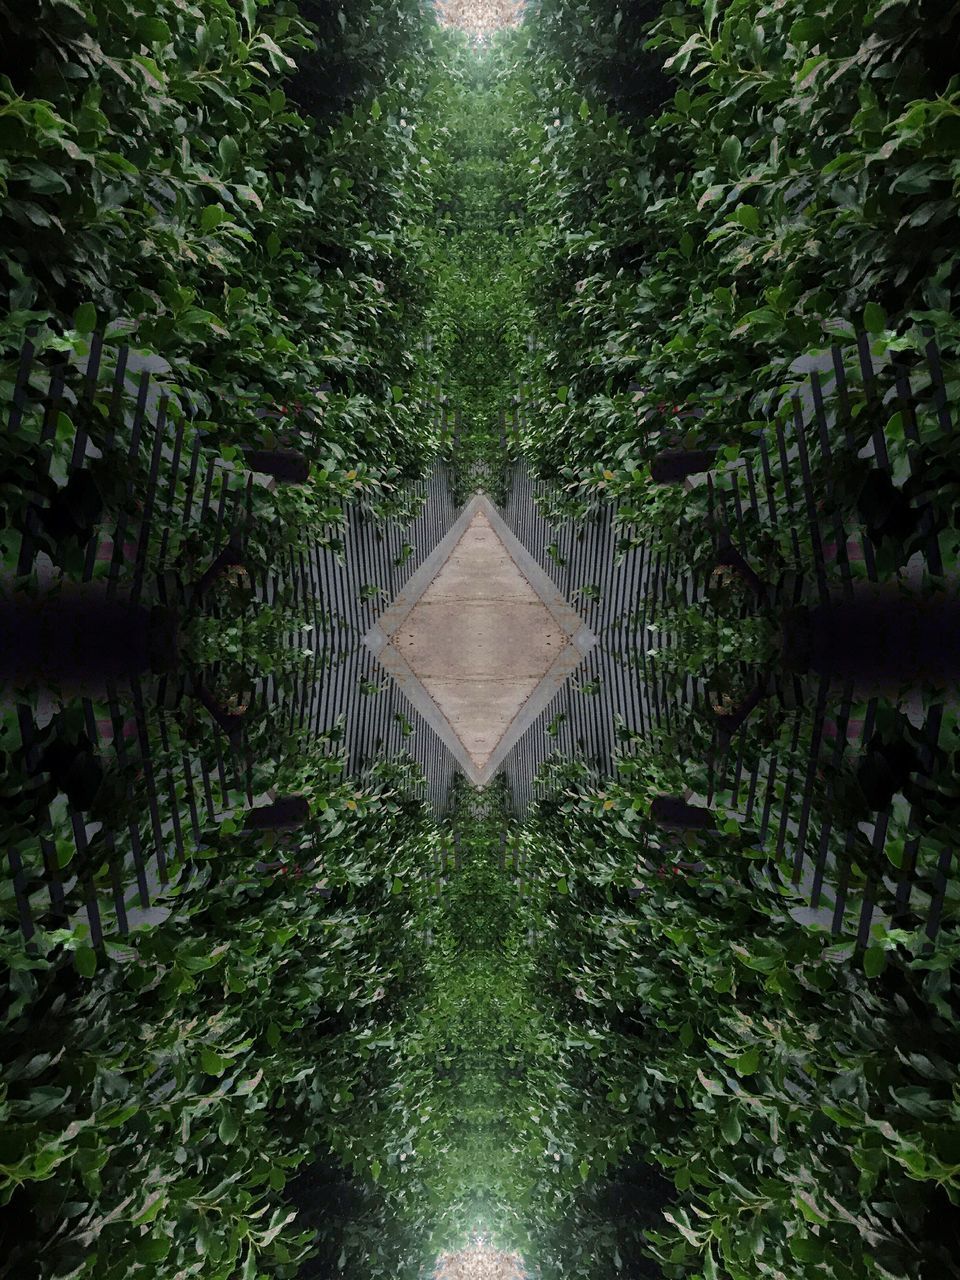 DIGITAL COMPOSITE IMAGE OF BAMBOO TREES